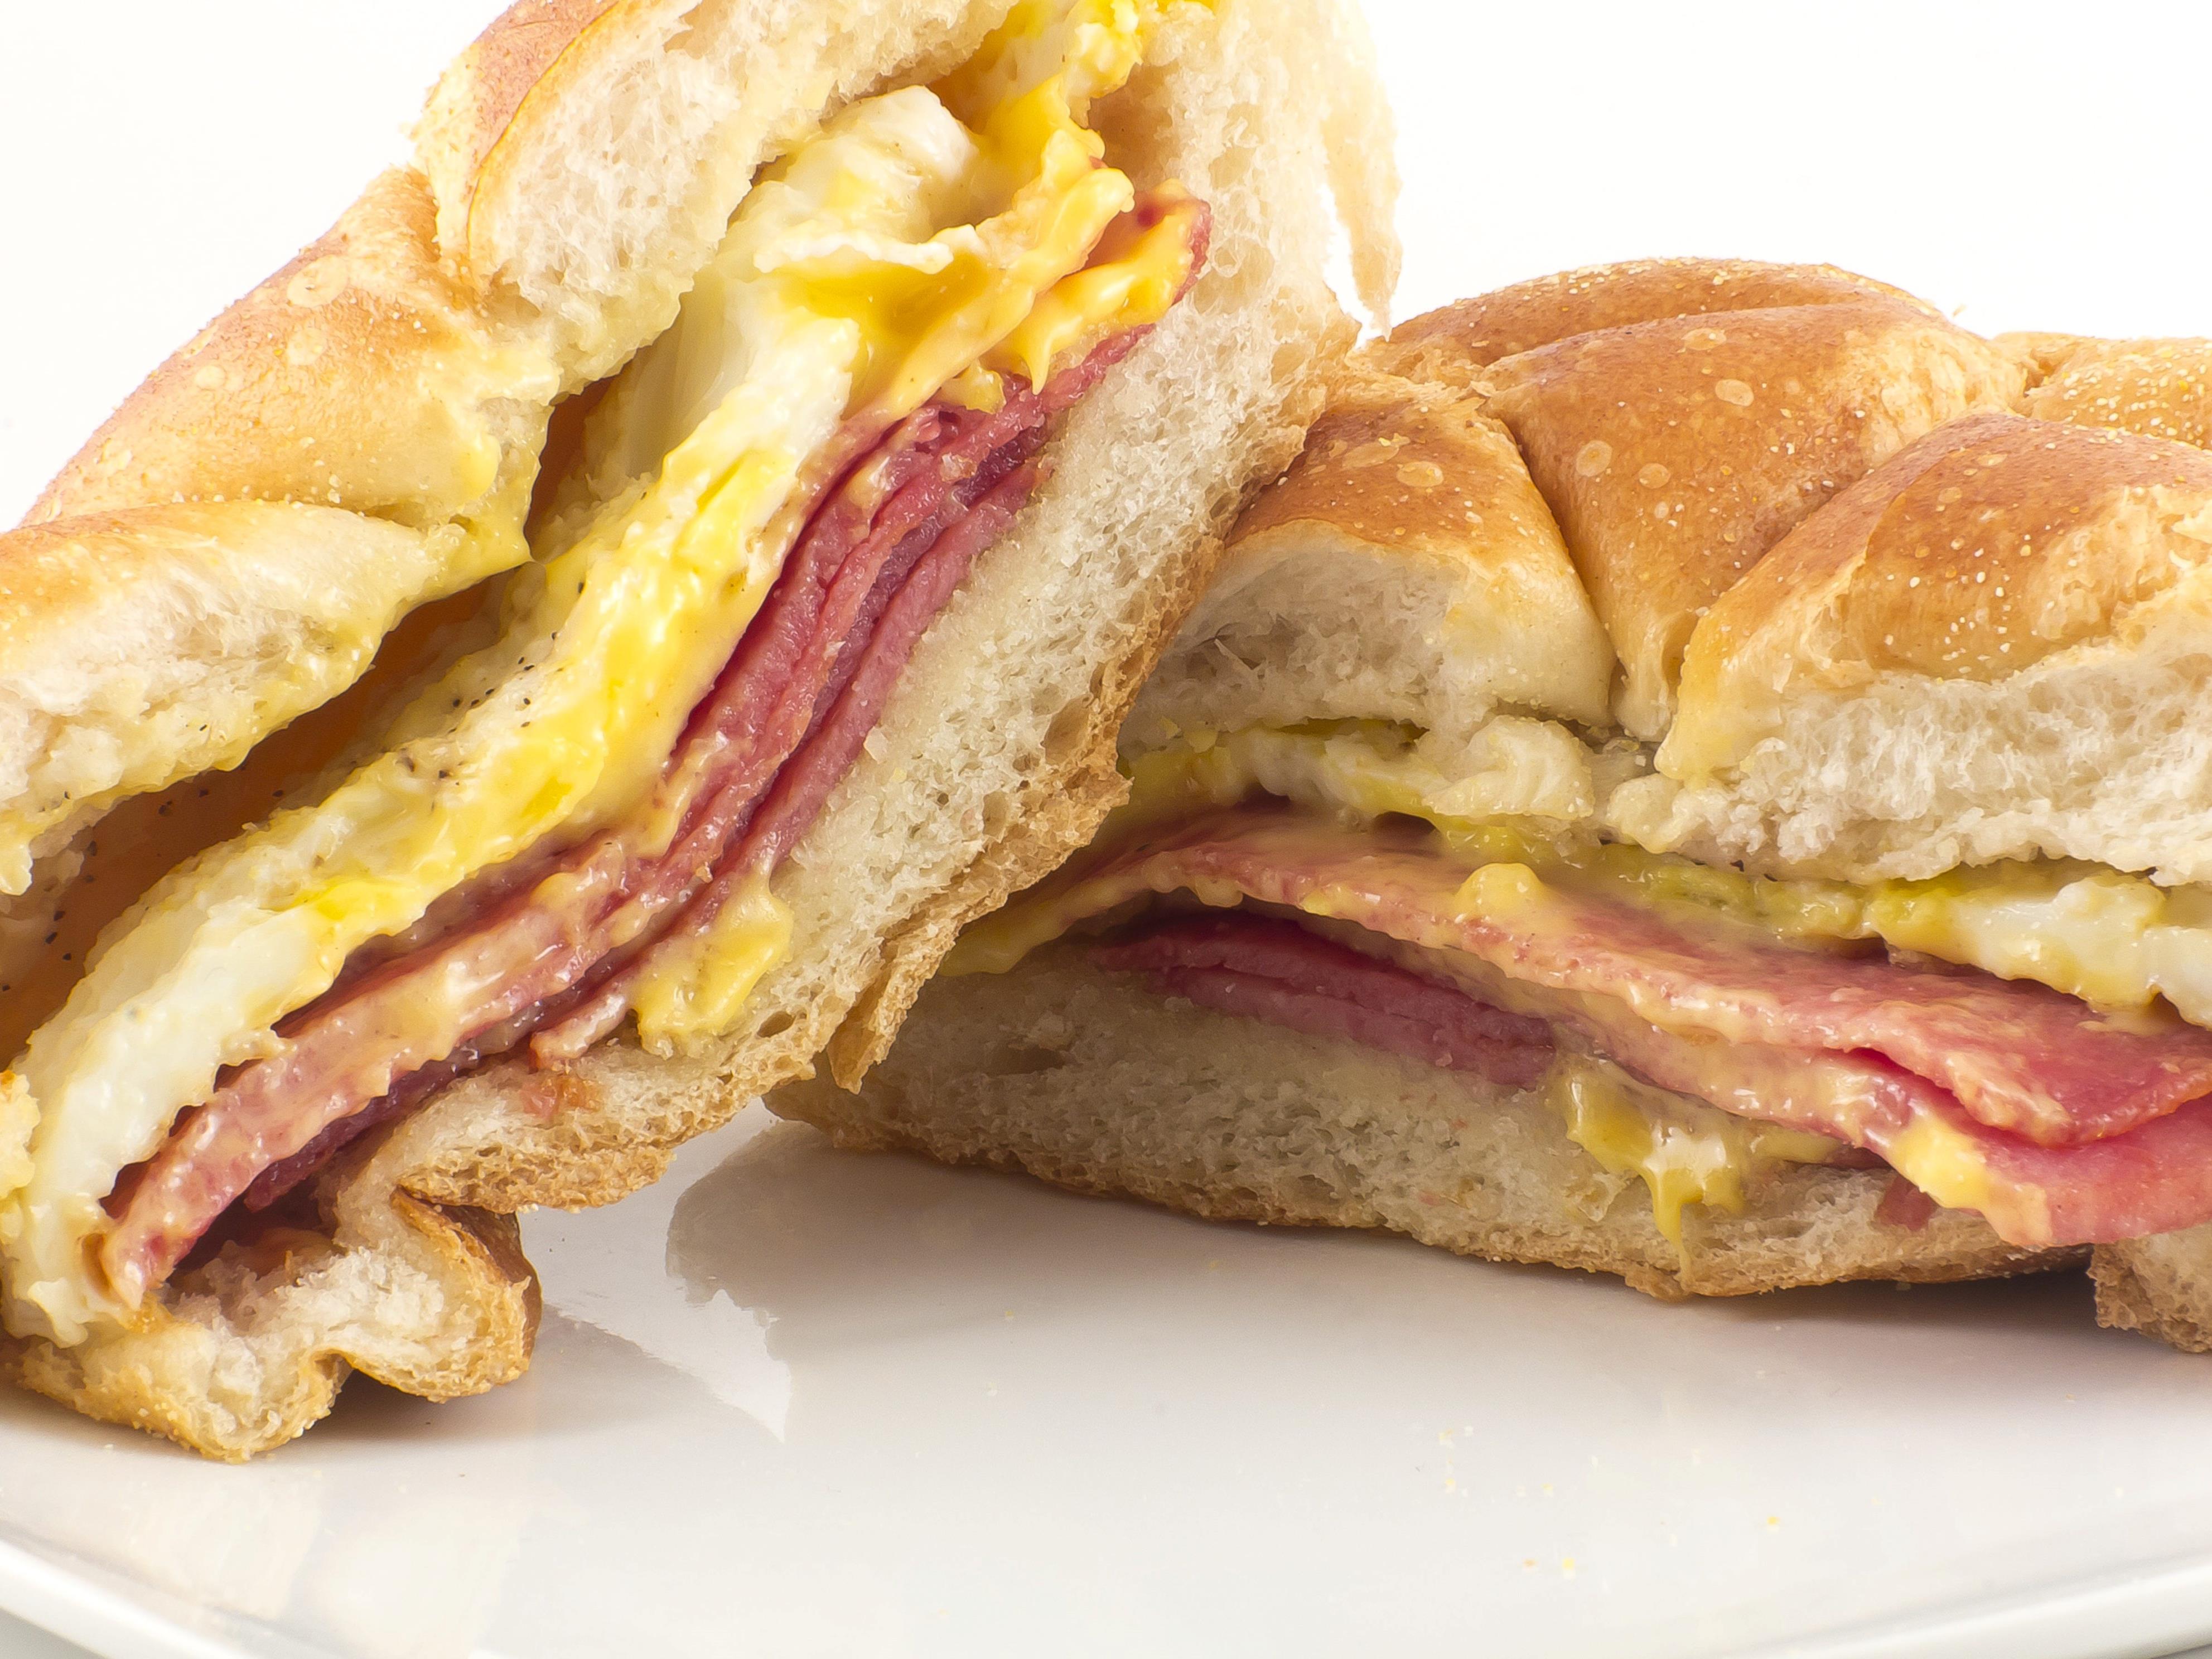 <p>Stop by any Garden State diner and try the signature Jersey breakfast sandwich. It's thick-cut Taylor ham (or pork roll) with egg and American cheese on a hard Kaiser roll or bagel.</p>